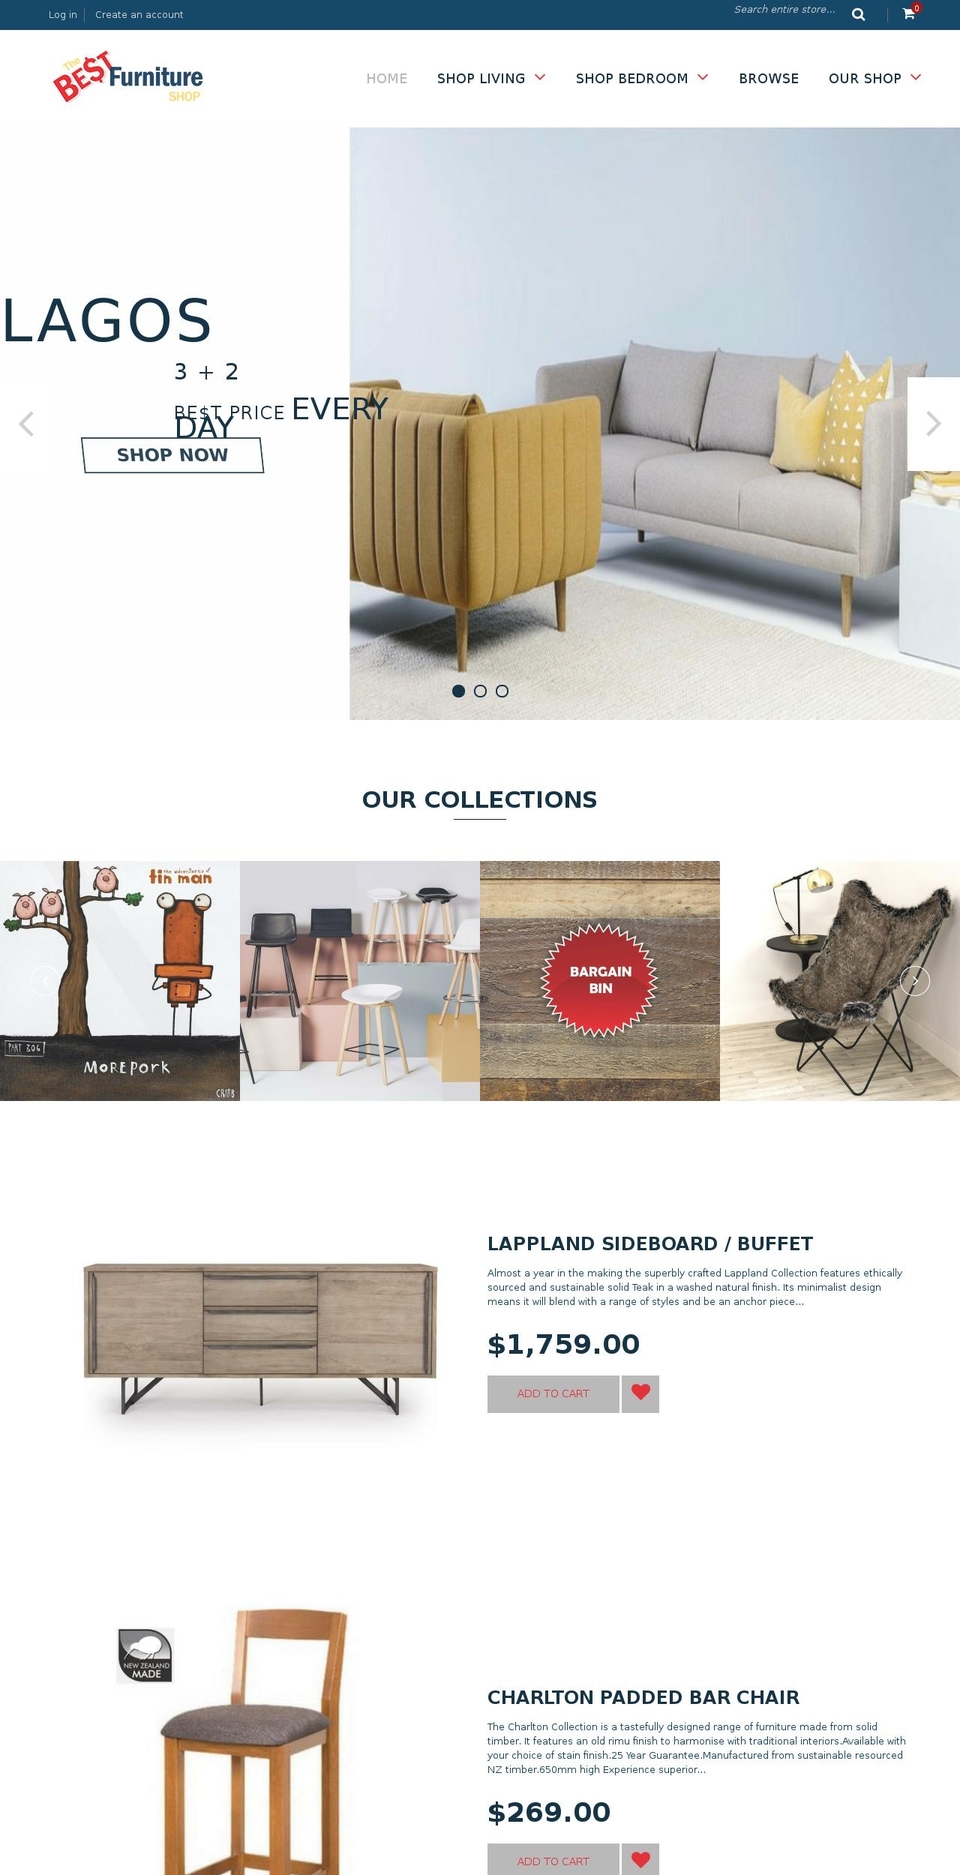 Loft Shopify theme site example bestfurniture.co.nz